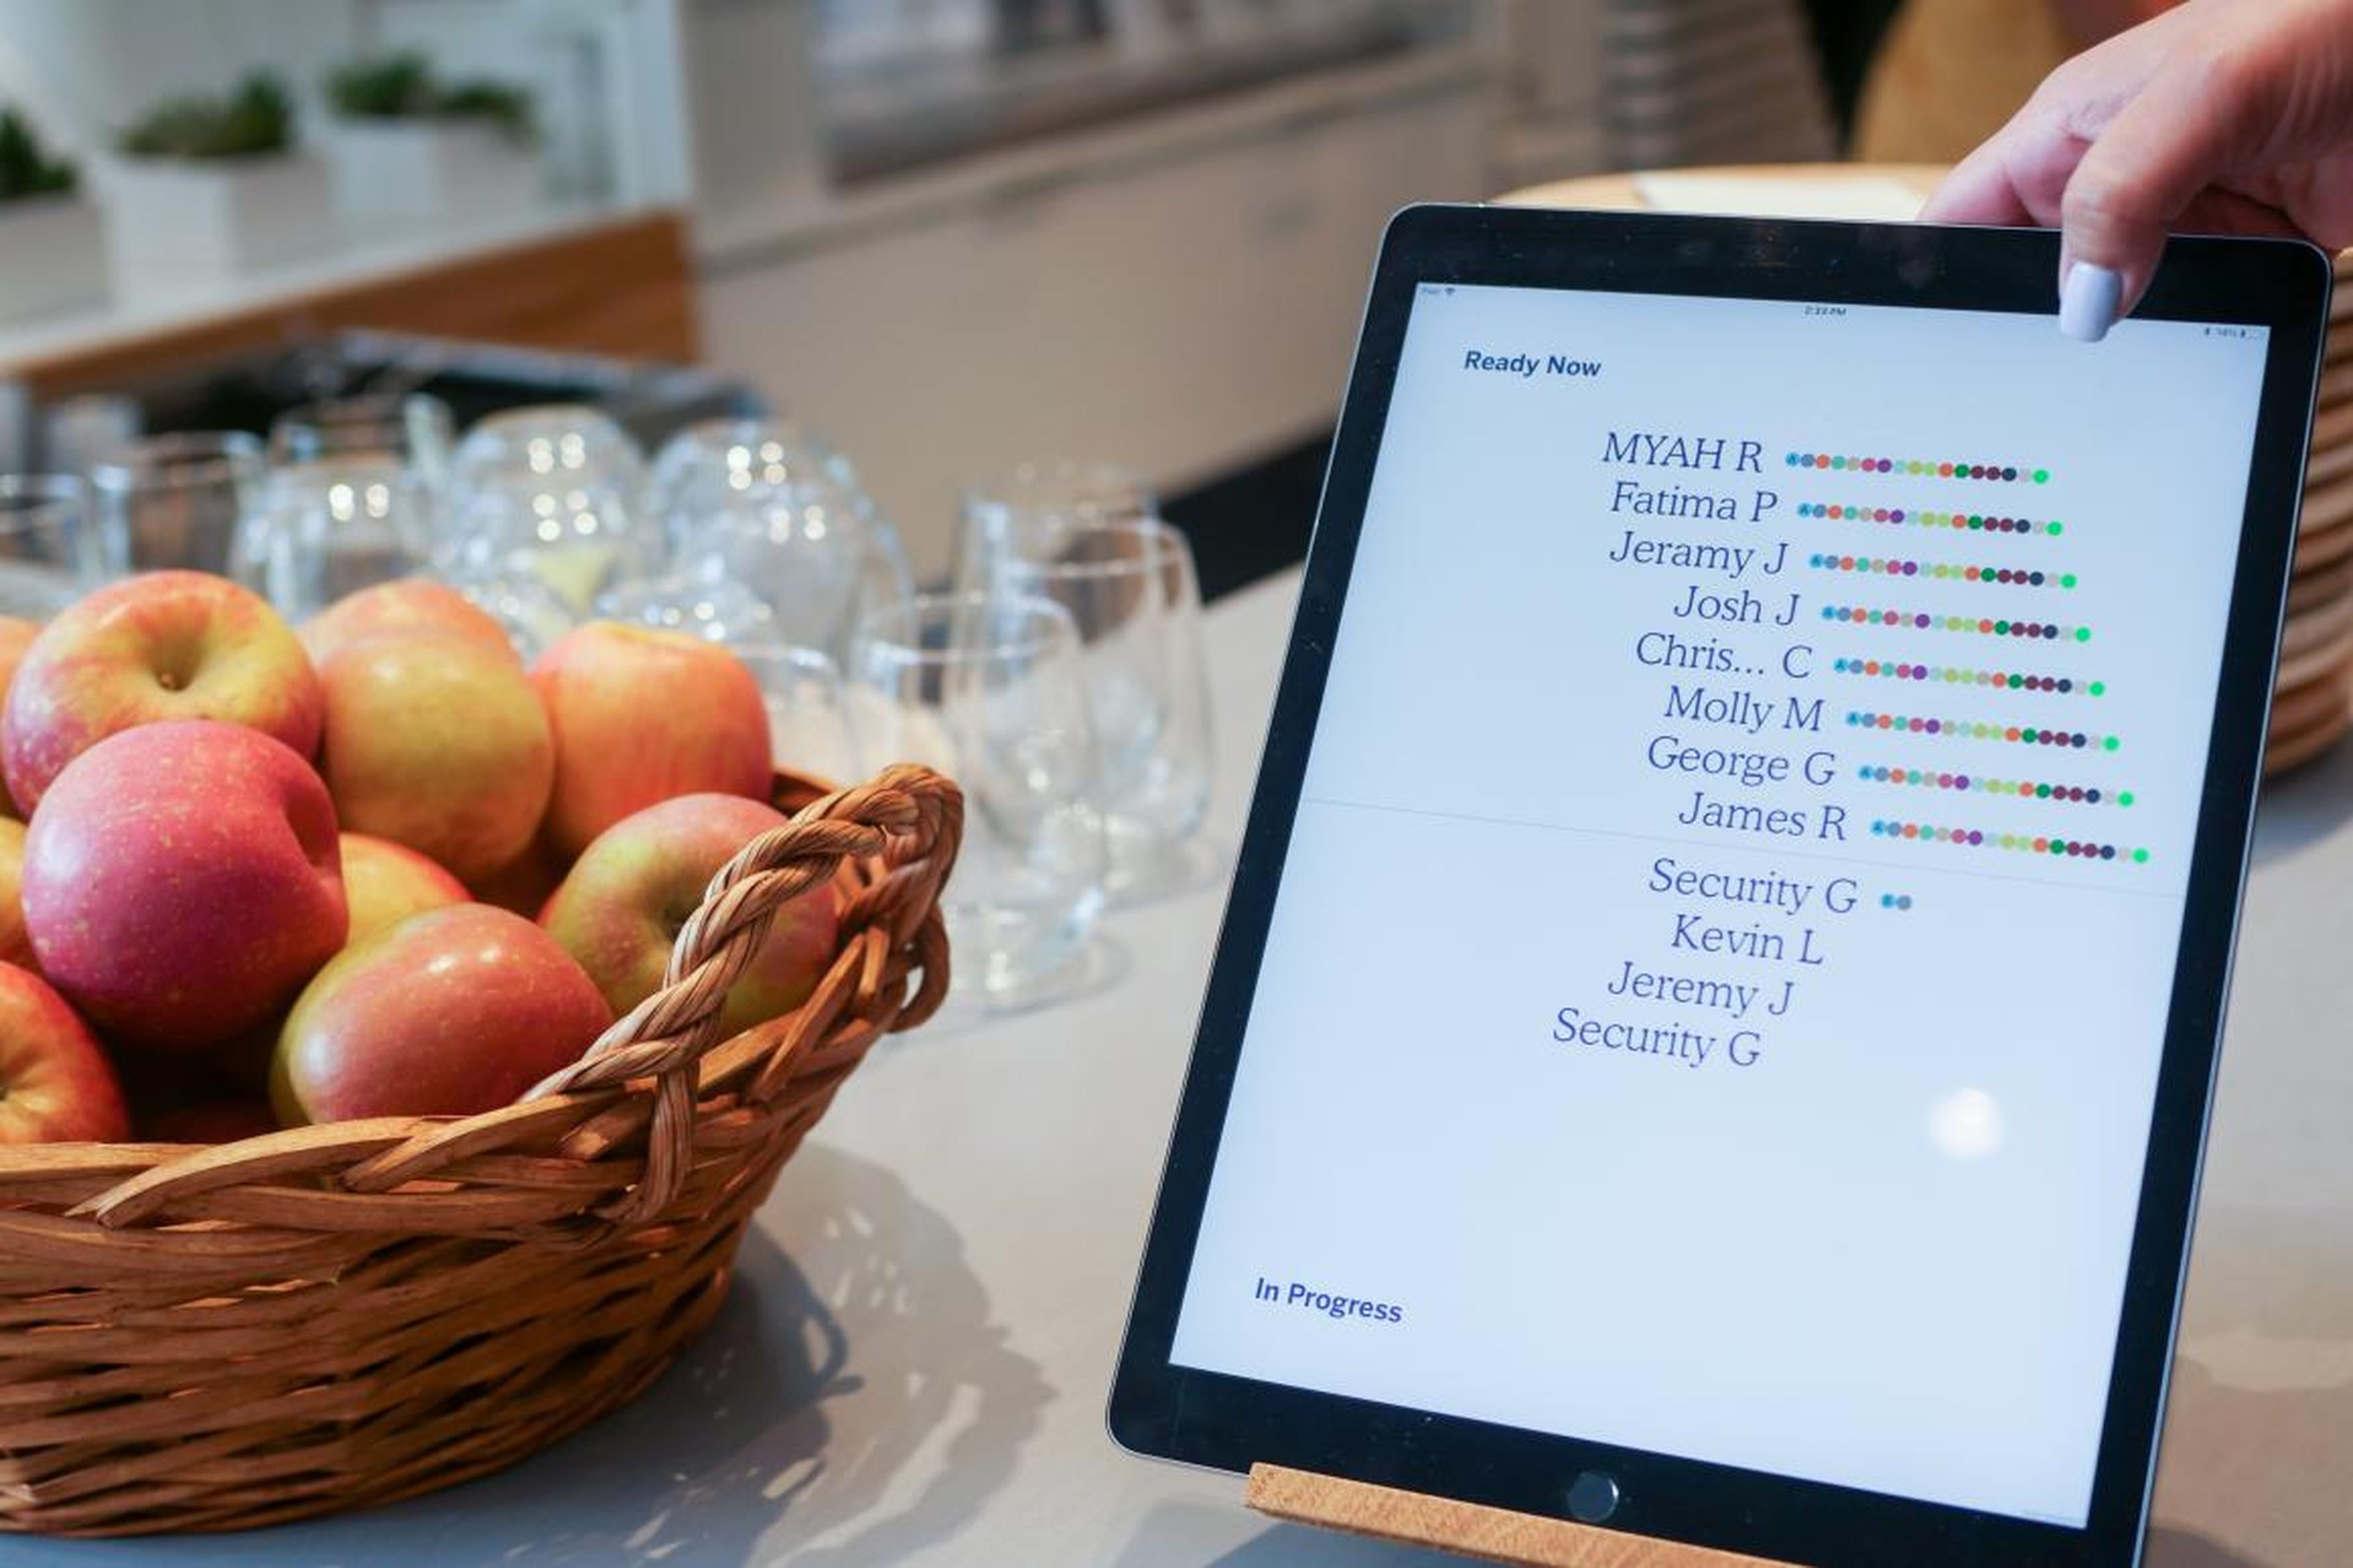 Guests can monitor their order on this tablet. The colored dots represent each stage in the robot's preparation process.